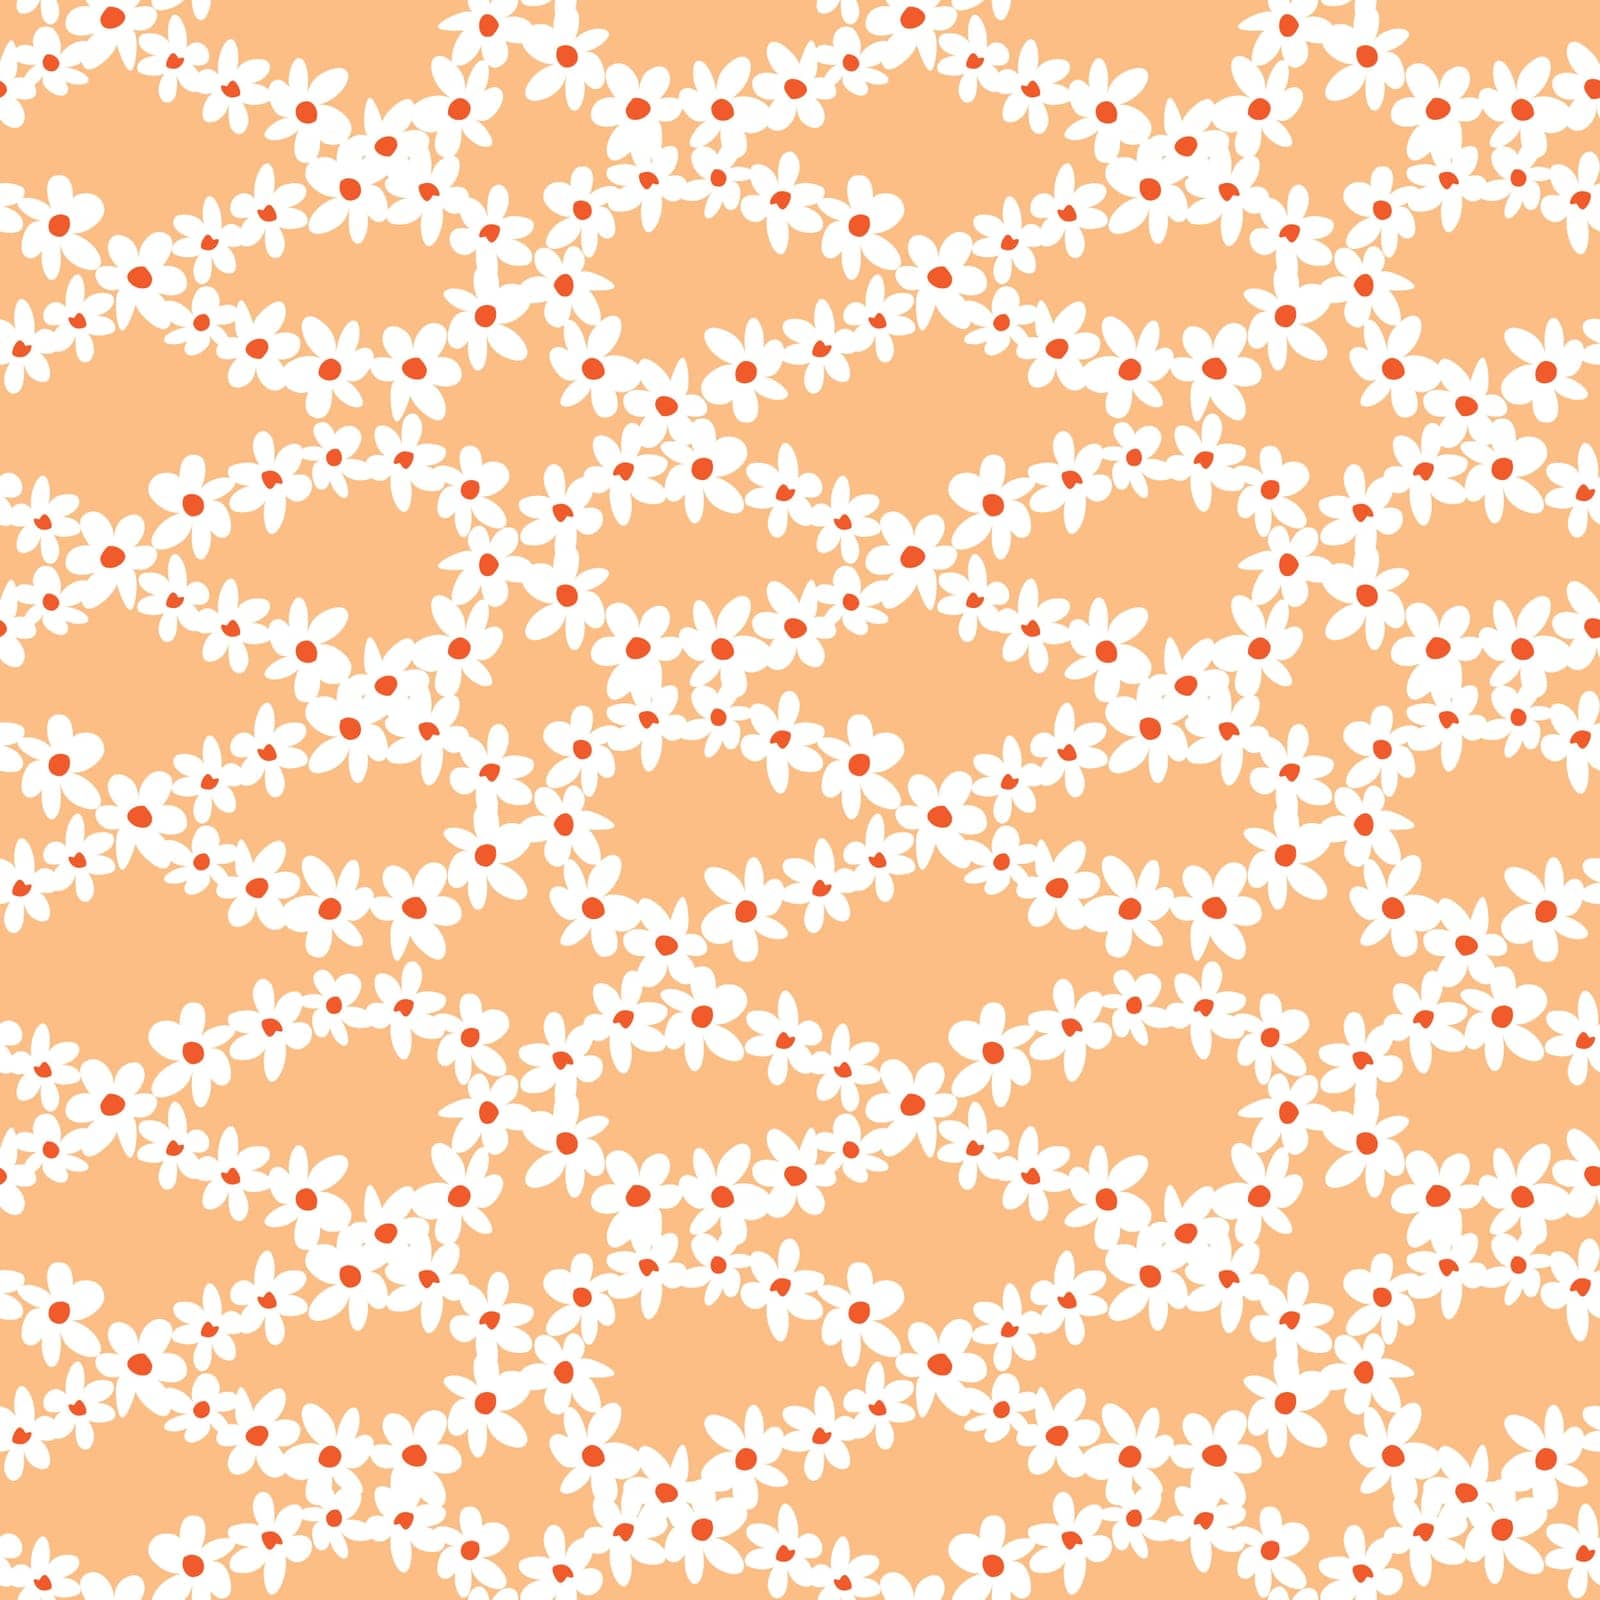 Vector orange fun daisy flowers infinity loop repeat pattern with orange center. Suitable for textile, gift wrap and wallpaper. Surface pattern design.